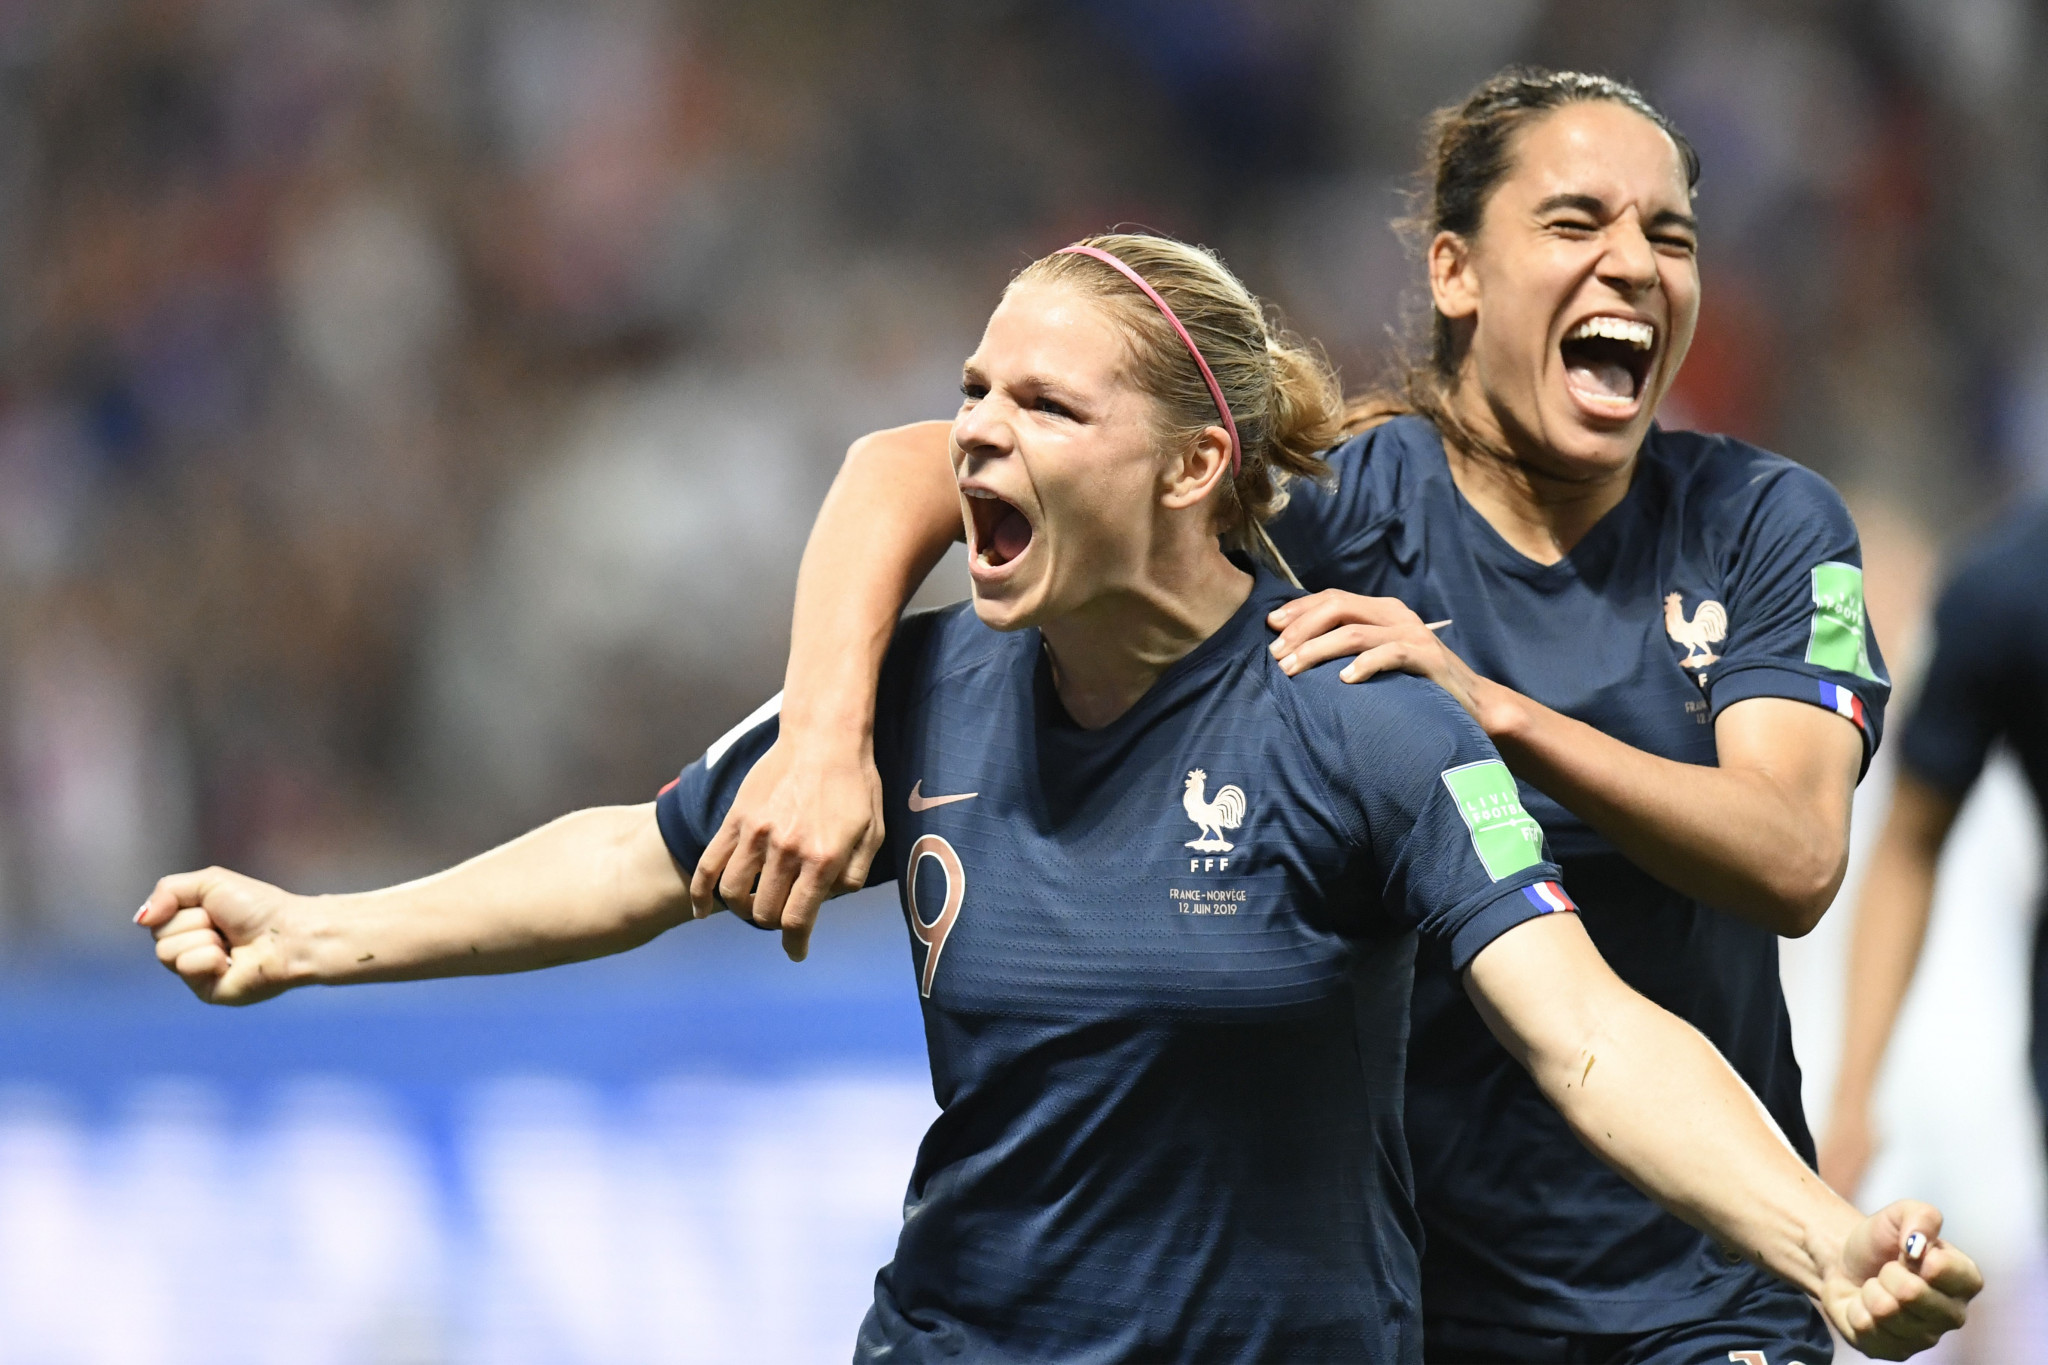 France defeated Norway 2-1 at the FIFA Women's World Cup ©Getty Images